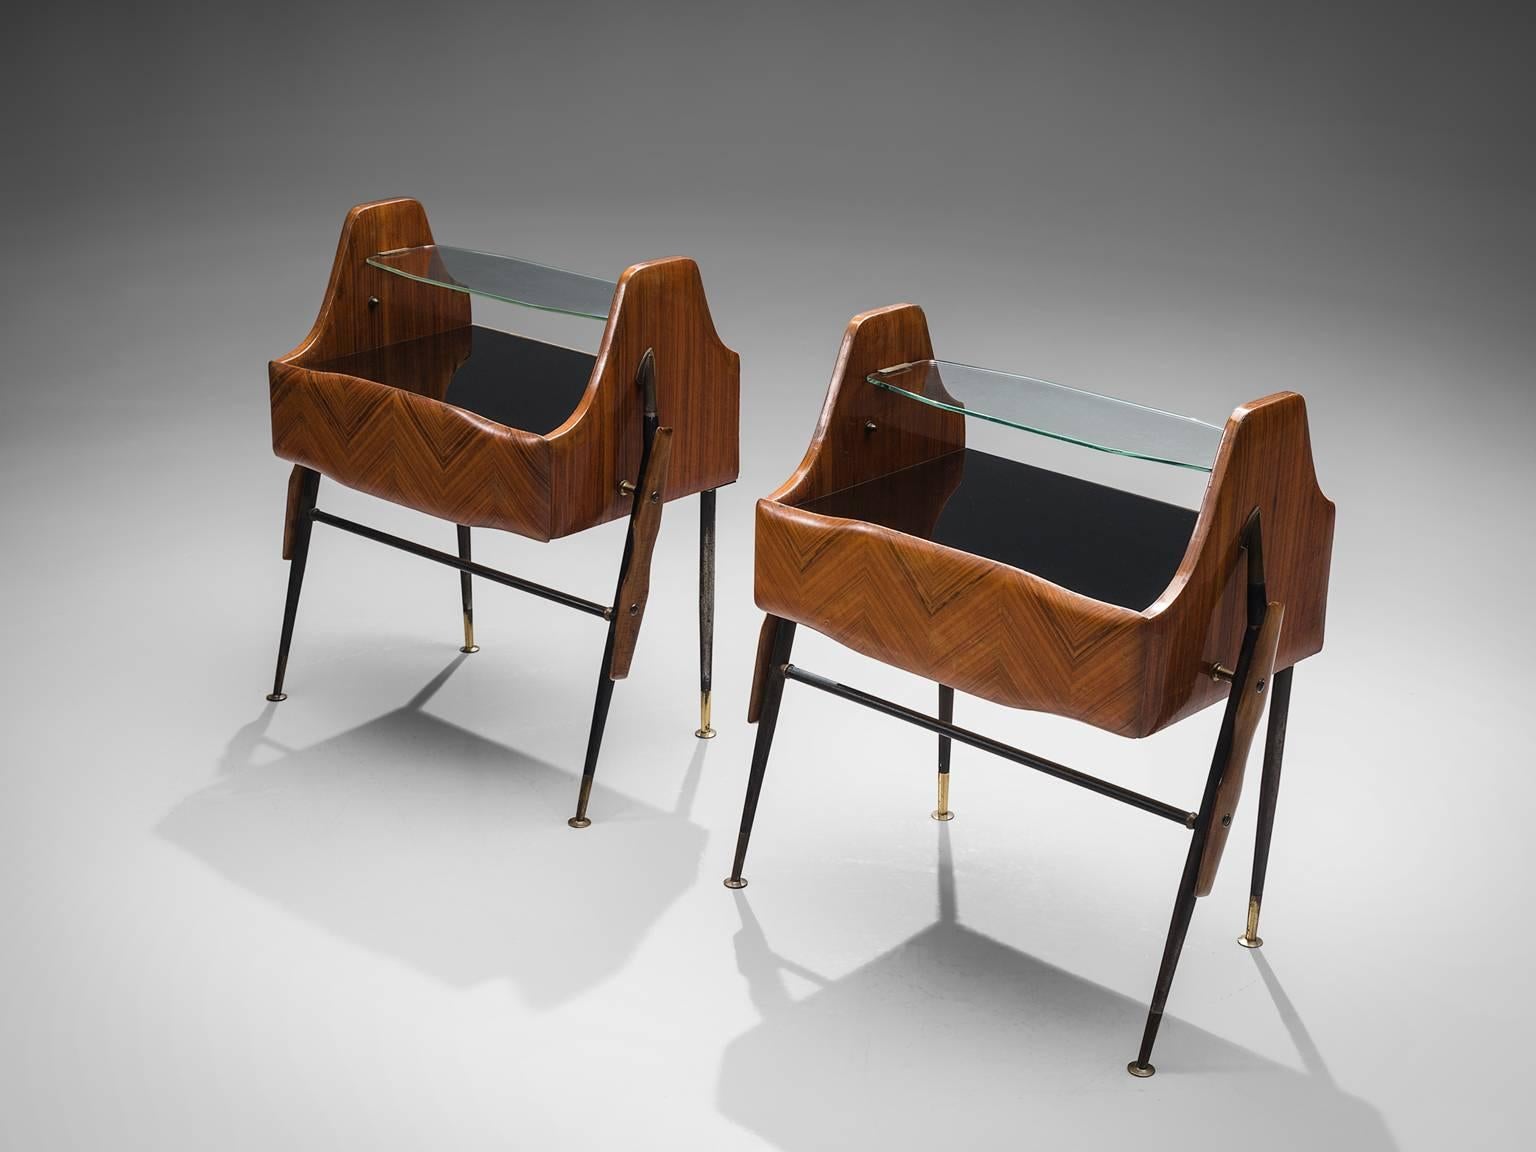 Nightstands, rosewood, metal, glass and brass, Italy, 1950s.

These two side tables or nightstands are both refined and elegant in every way. The glass top hangs in between the main body that has a rosewood inlayed pattern. The main body of the